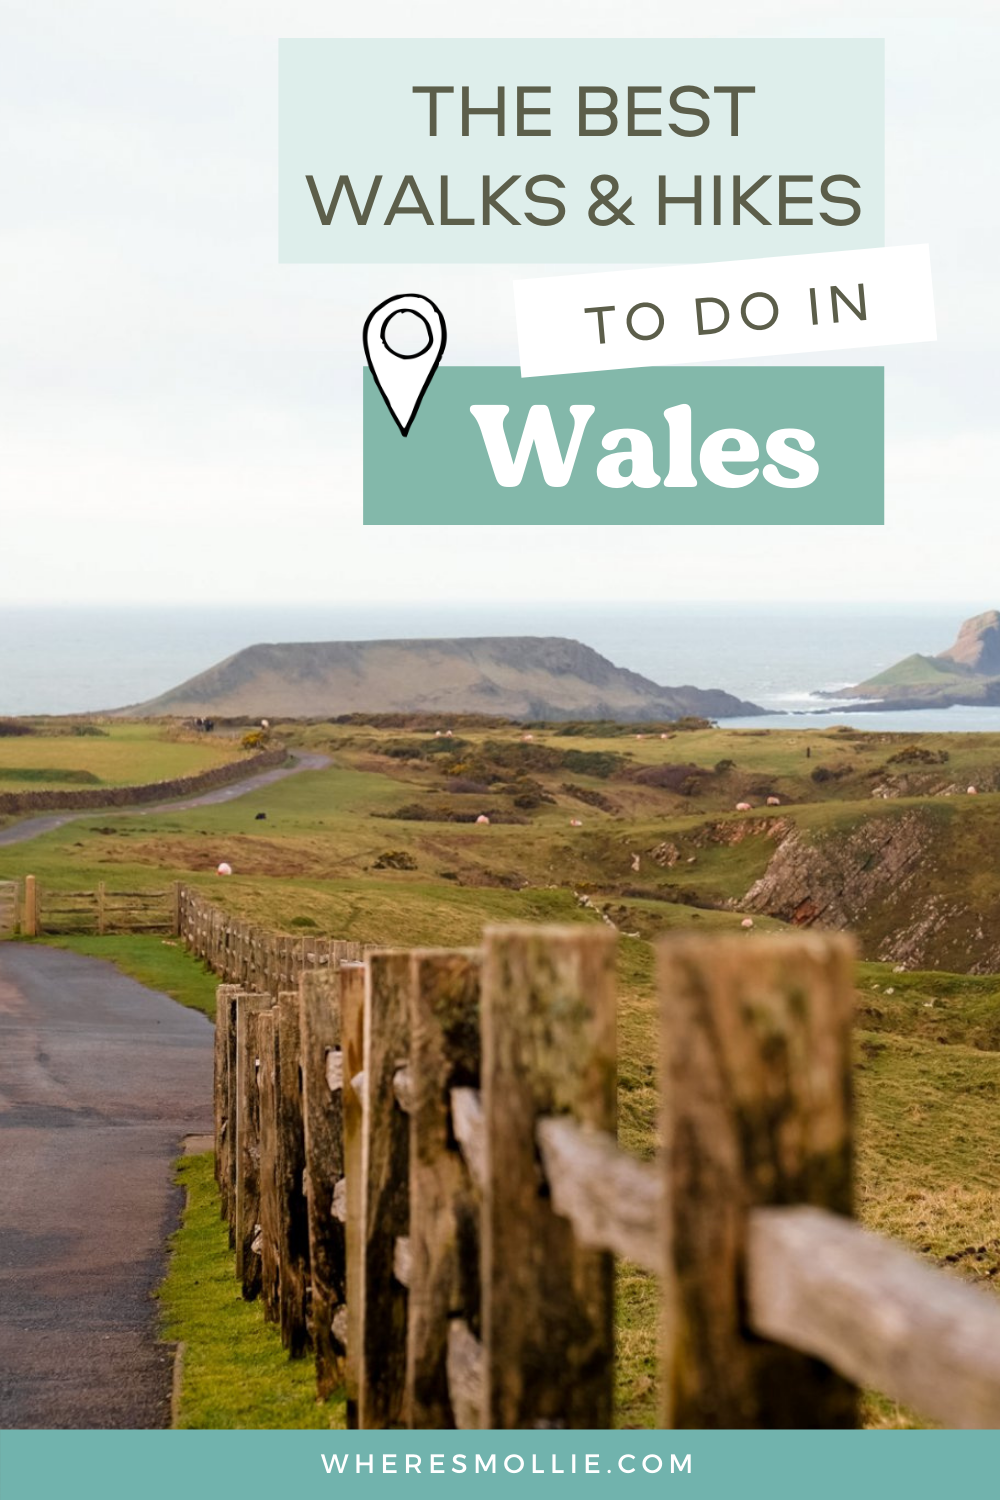 10 hikes and walks to go on in Wales